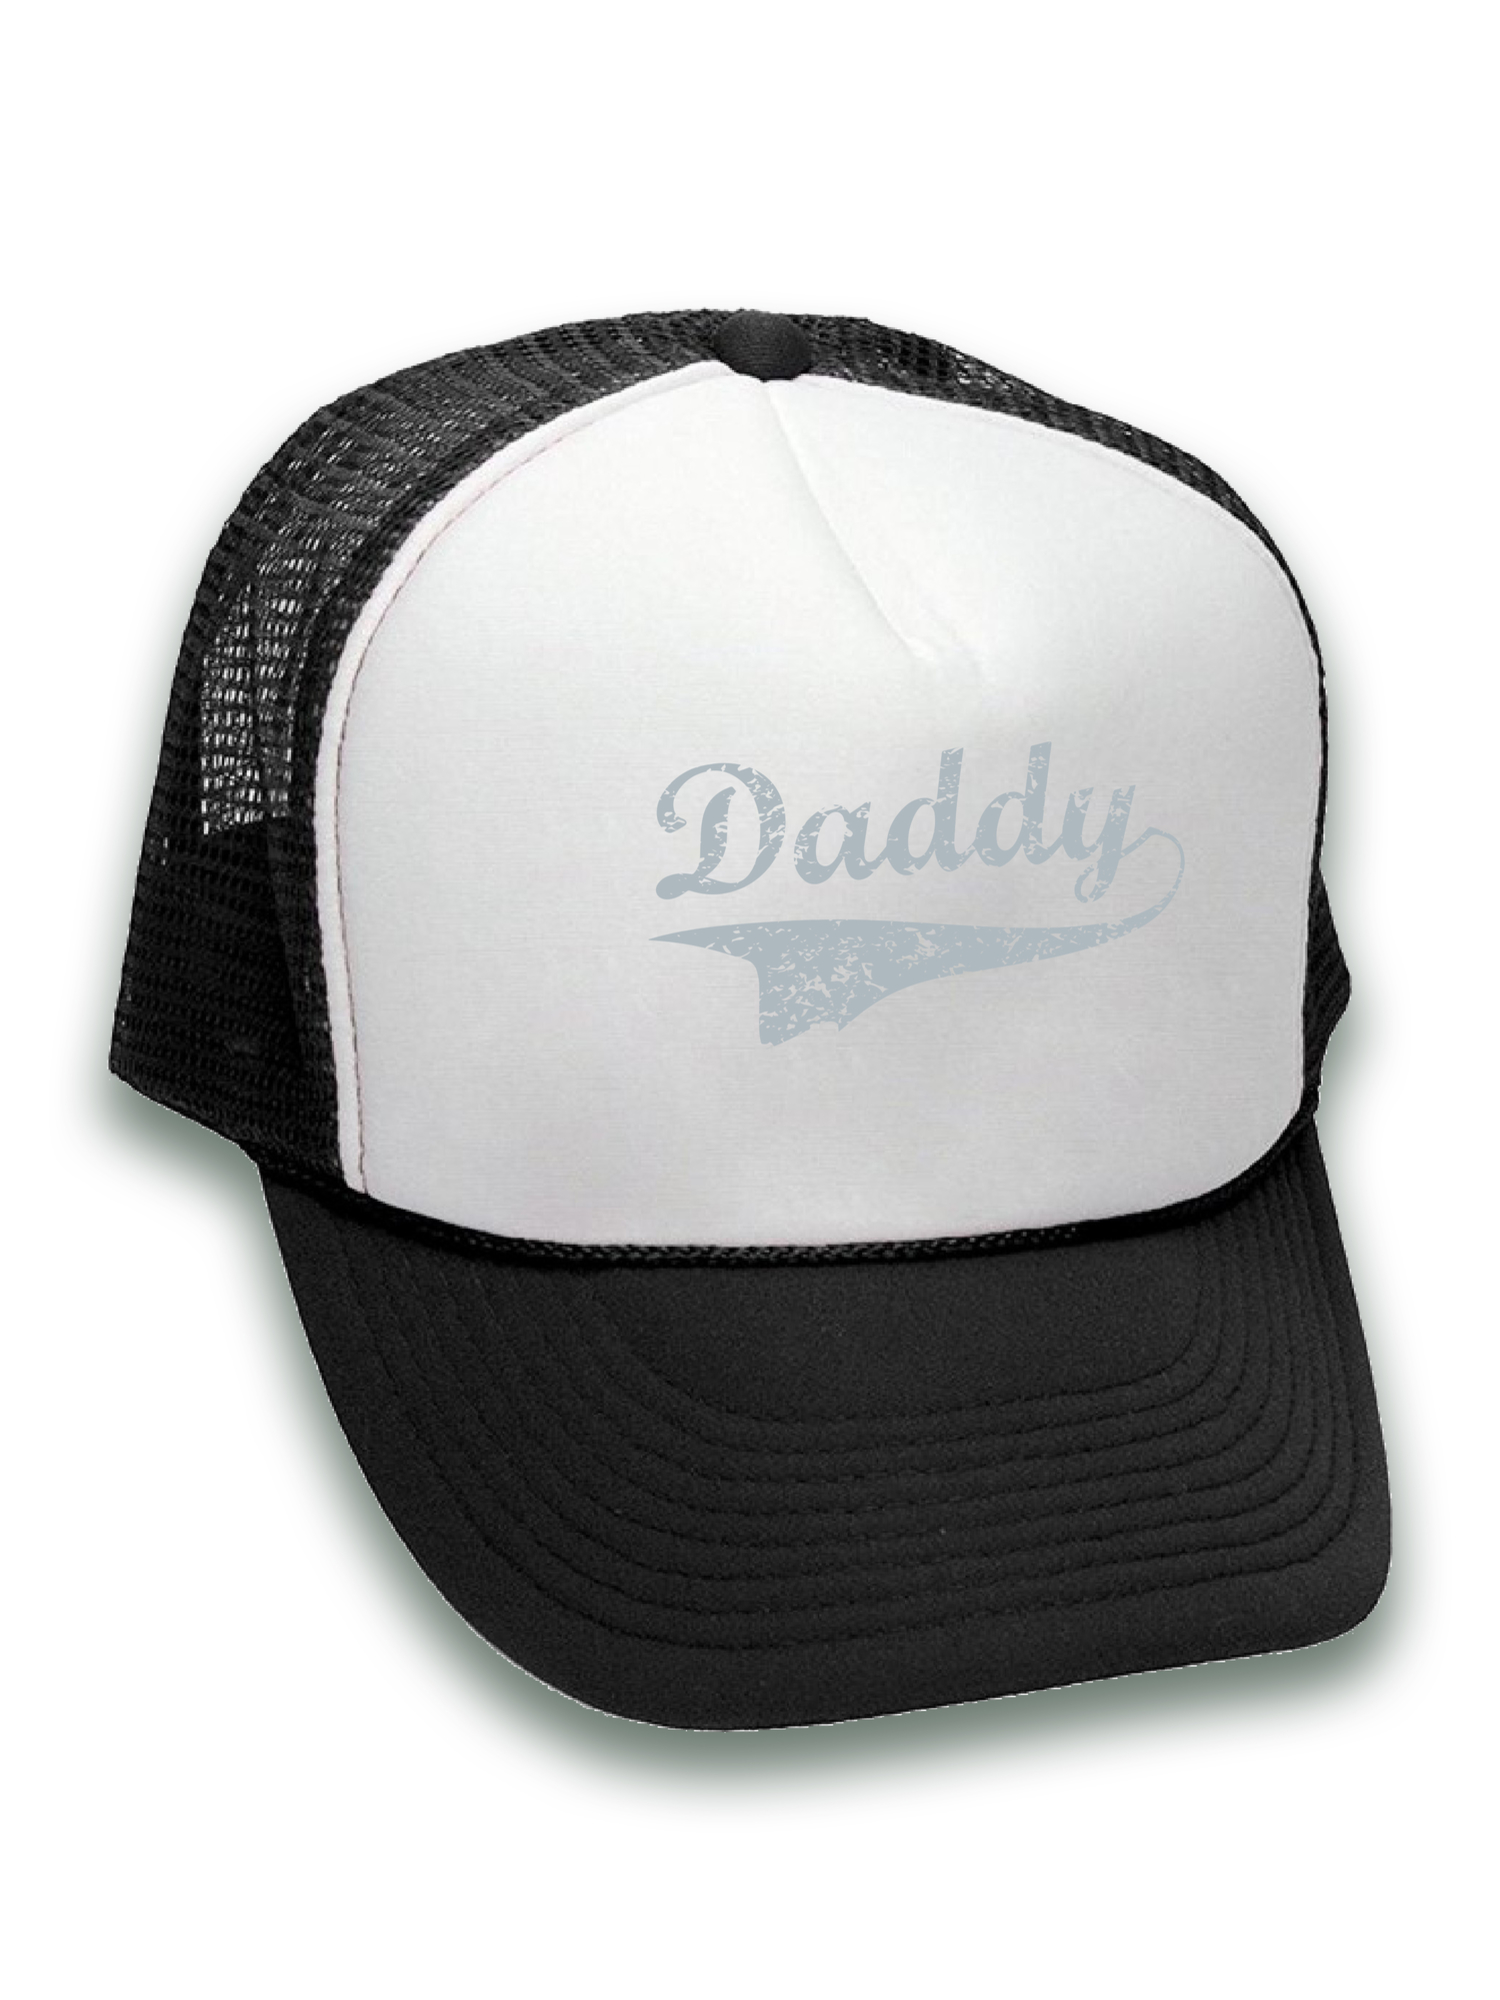 Awkward Styles Daddy Hat Father's Day Gifts for Men Dad Hats Dad 2018 Trucker Hat Funny Gifts for Dad Hat Accessories for Men Father Trucker Hat Daddy 2018 Snapback Hat Dad Hats with Sayings - image 2 of 6